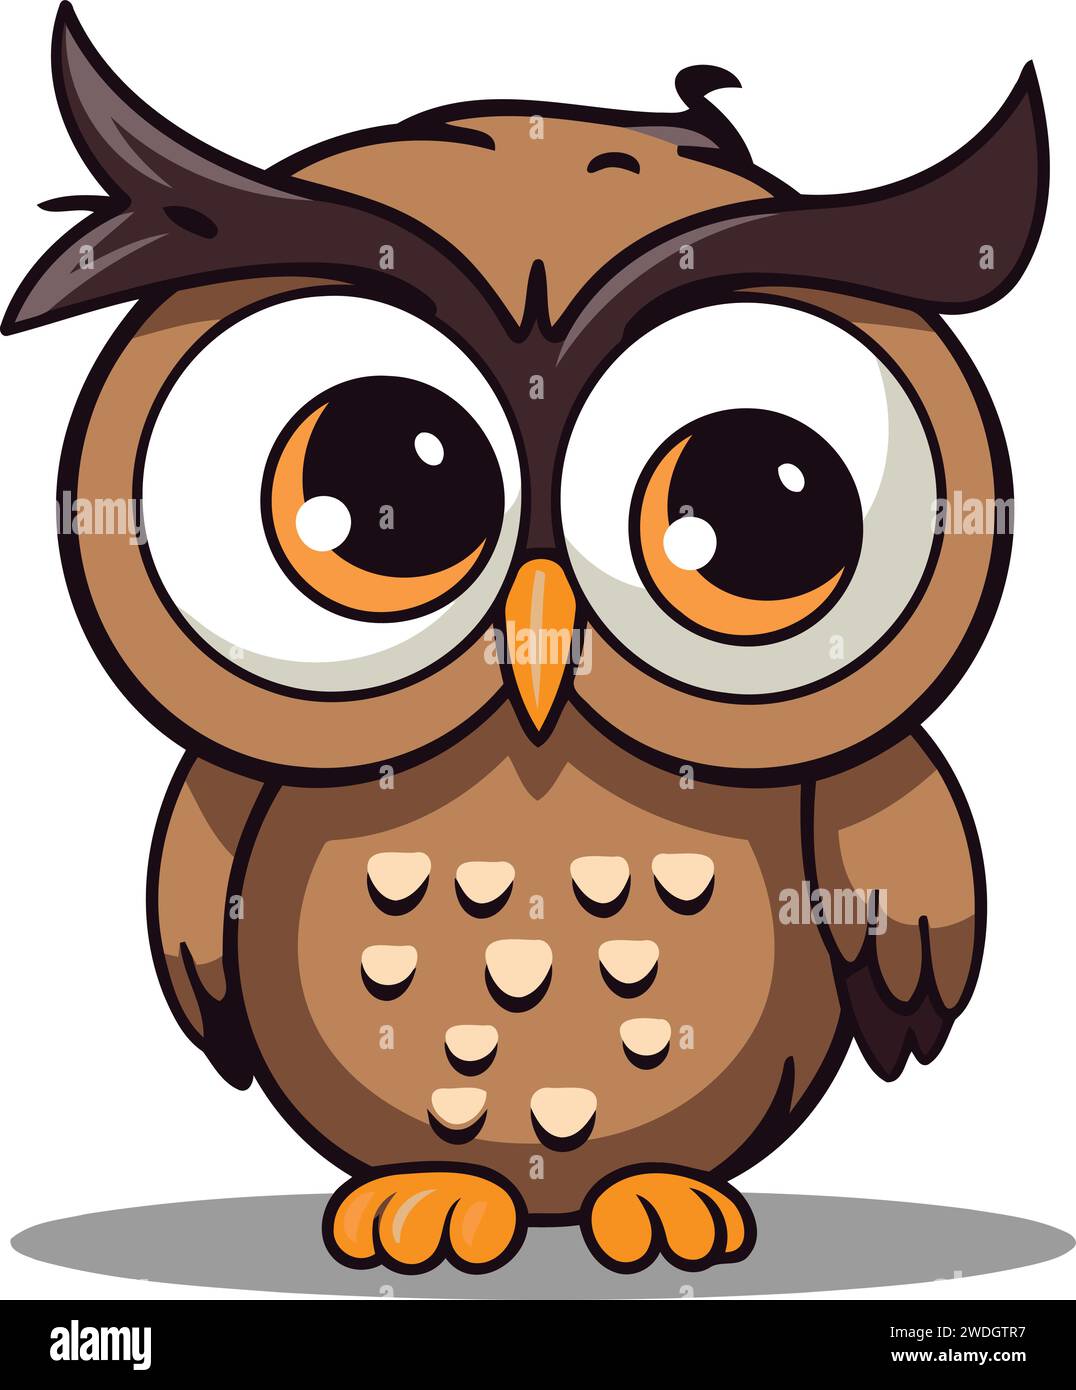 Cute owl cartoon character on a white background. Vector illustration. Stock Vector